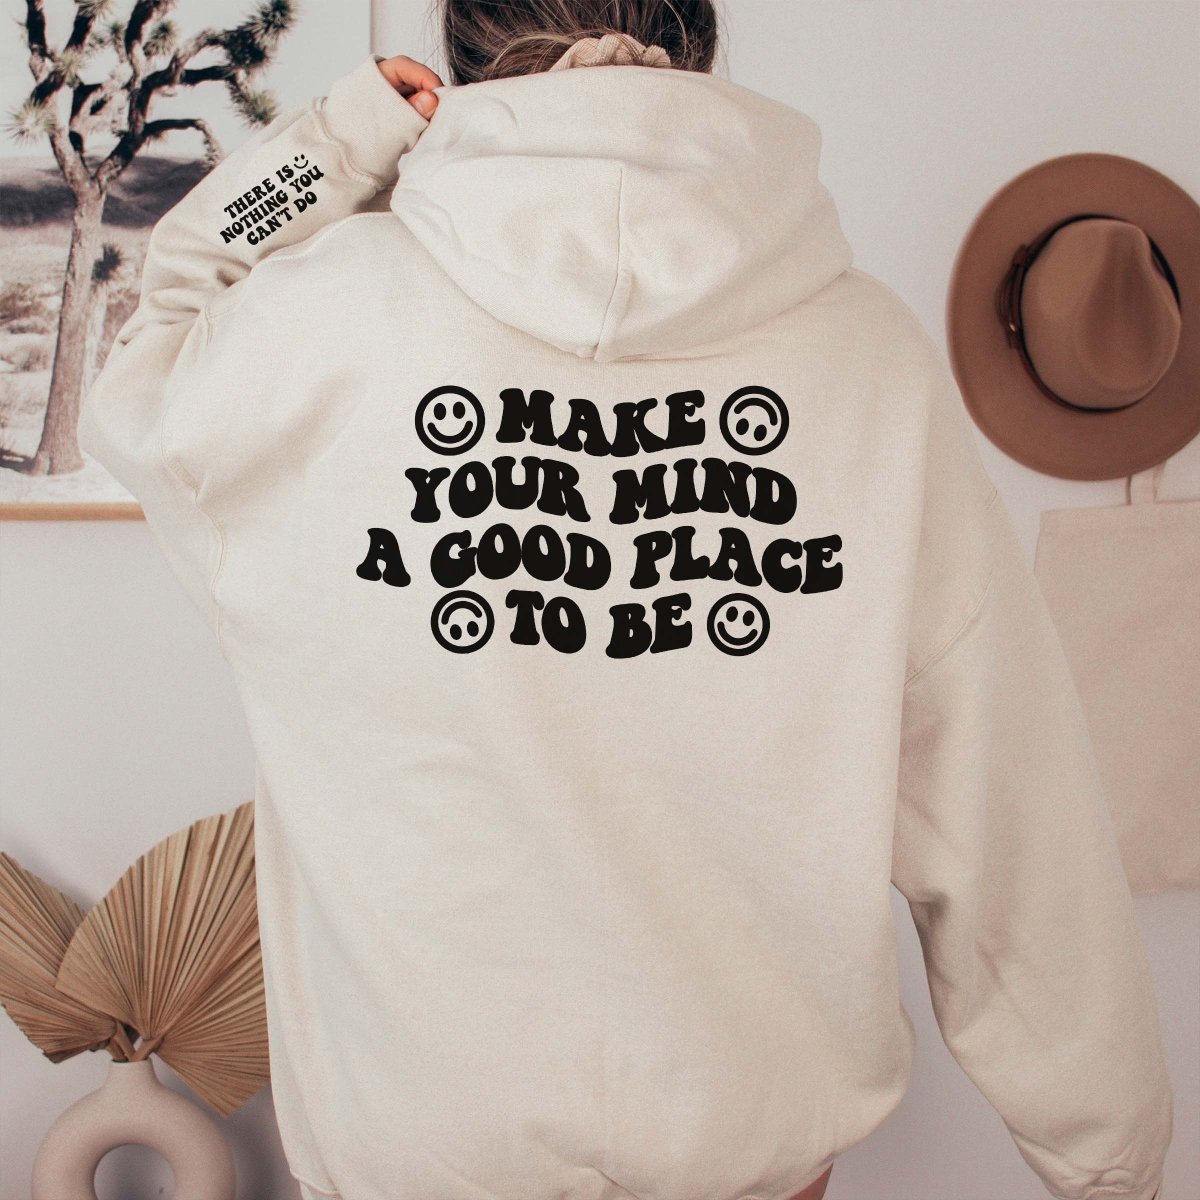 Good Place to Be Wholesale Hoodie With Sleeve Design - Limeberry Designs